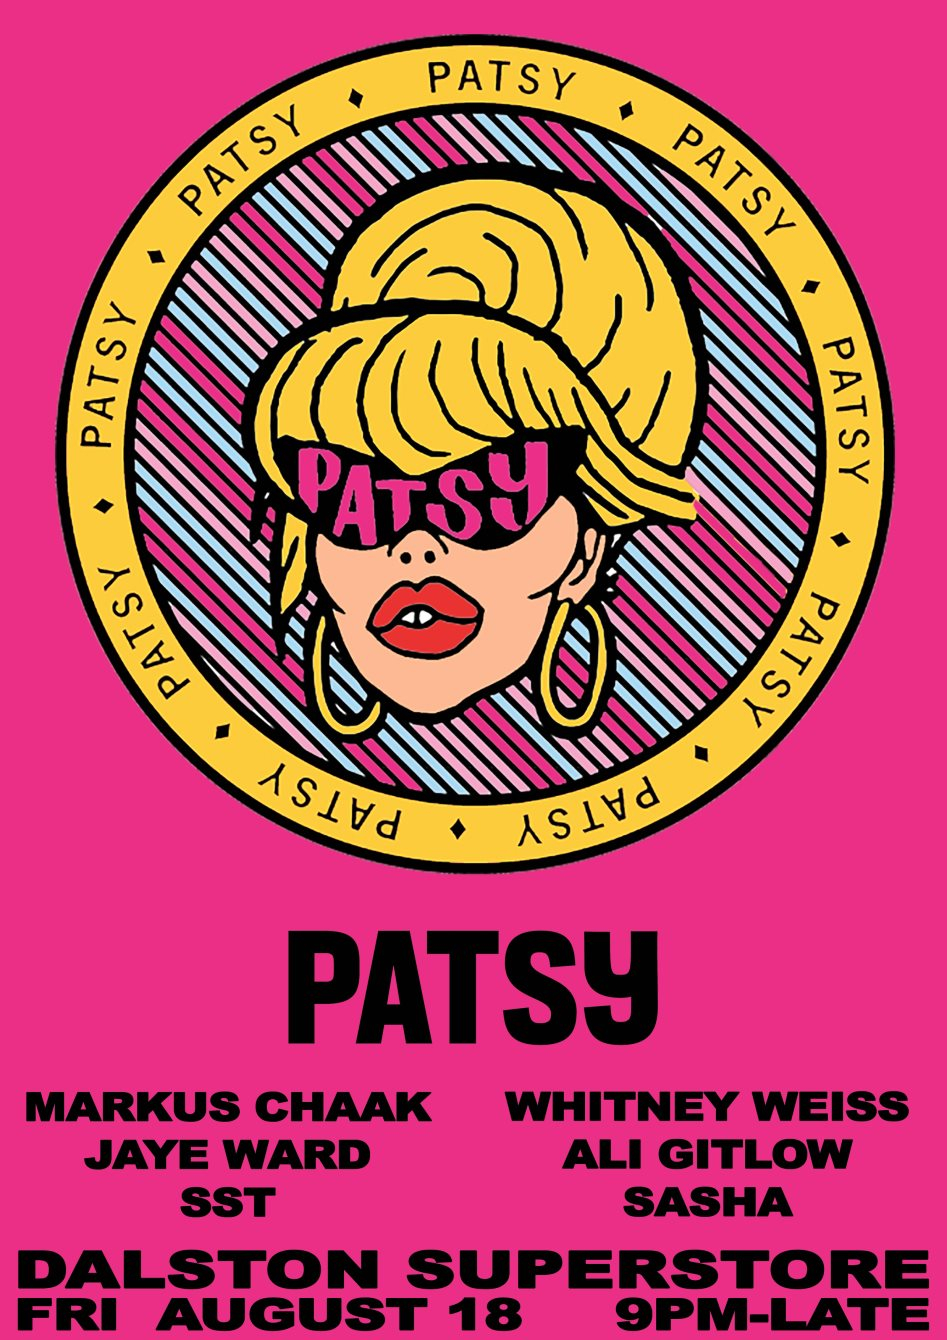 Patsy with Markus Chaak, Jaye Ward, SST, and More - Flyer front